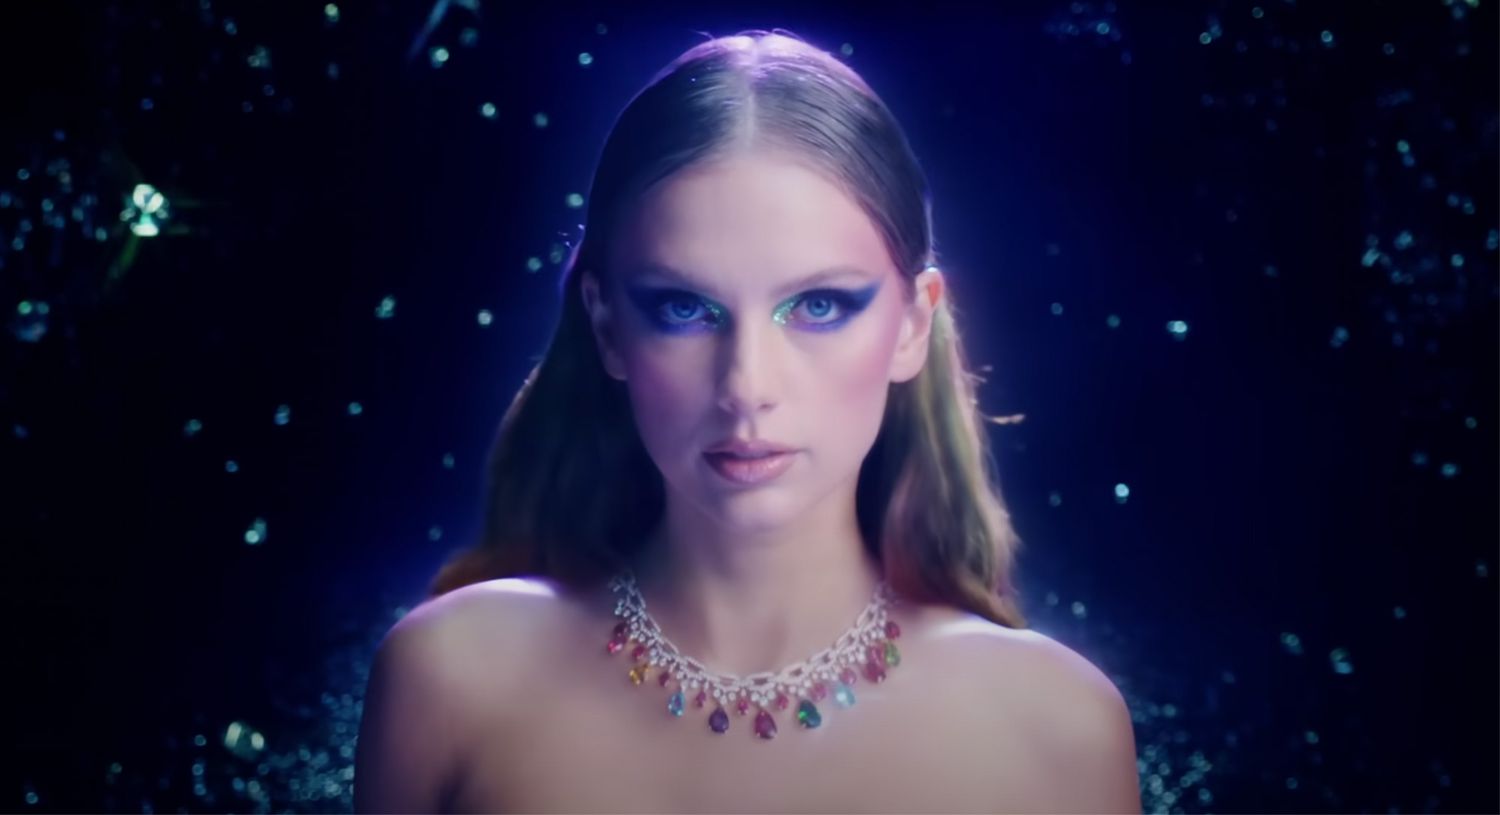 Breaking down all the Easter eggs in Taylor Swift's 'Bejeweled' music video